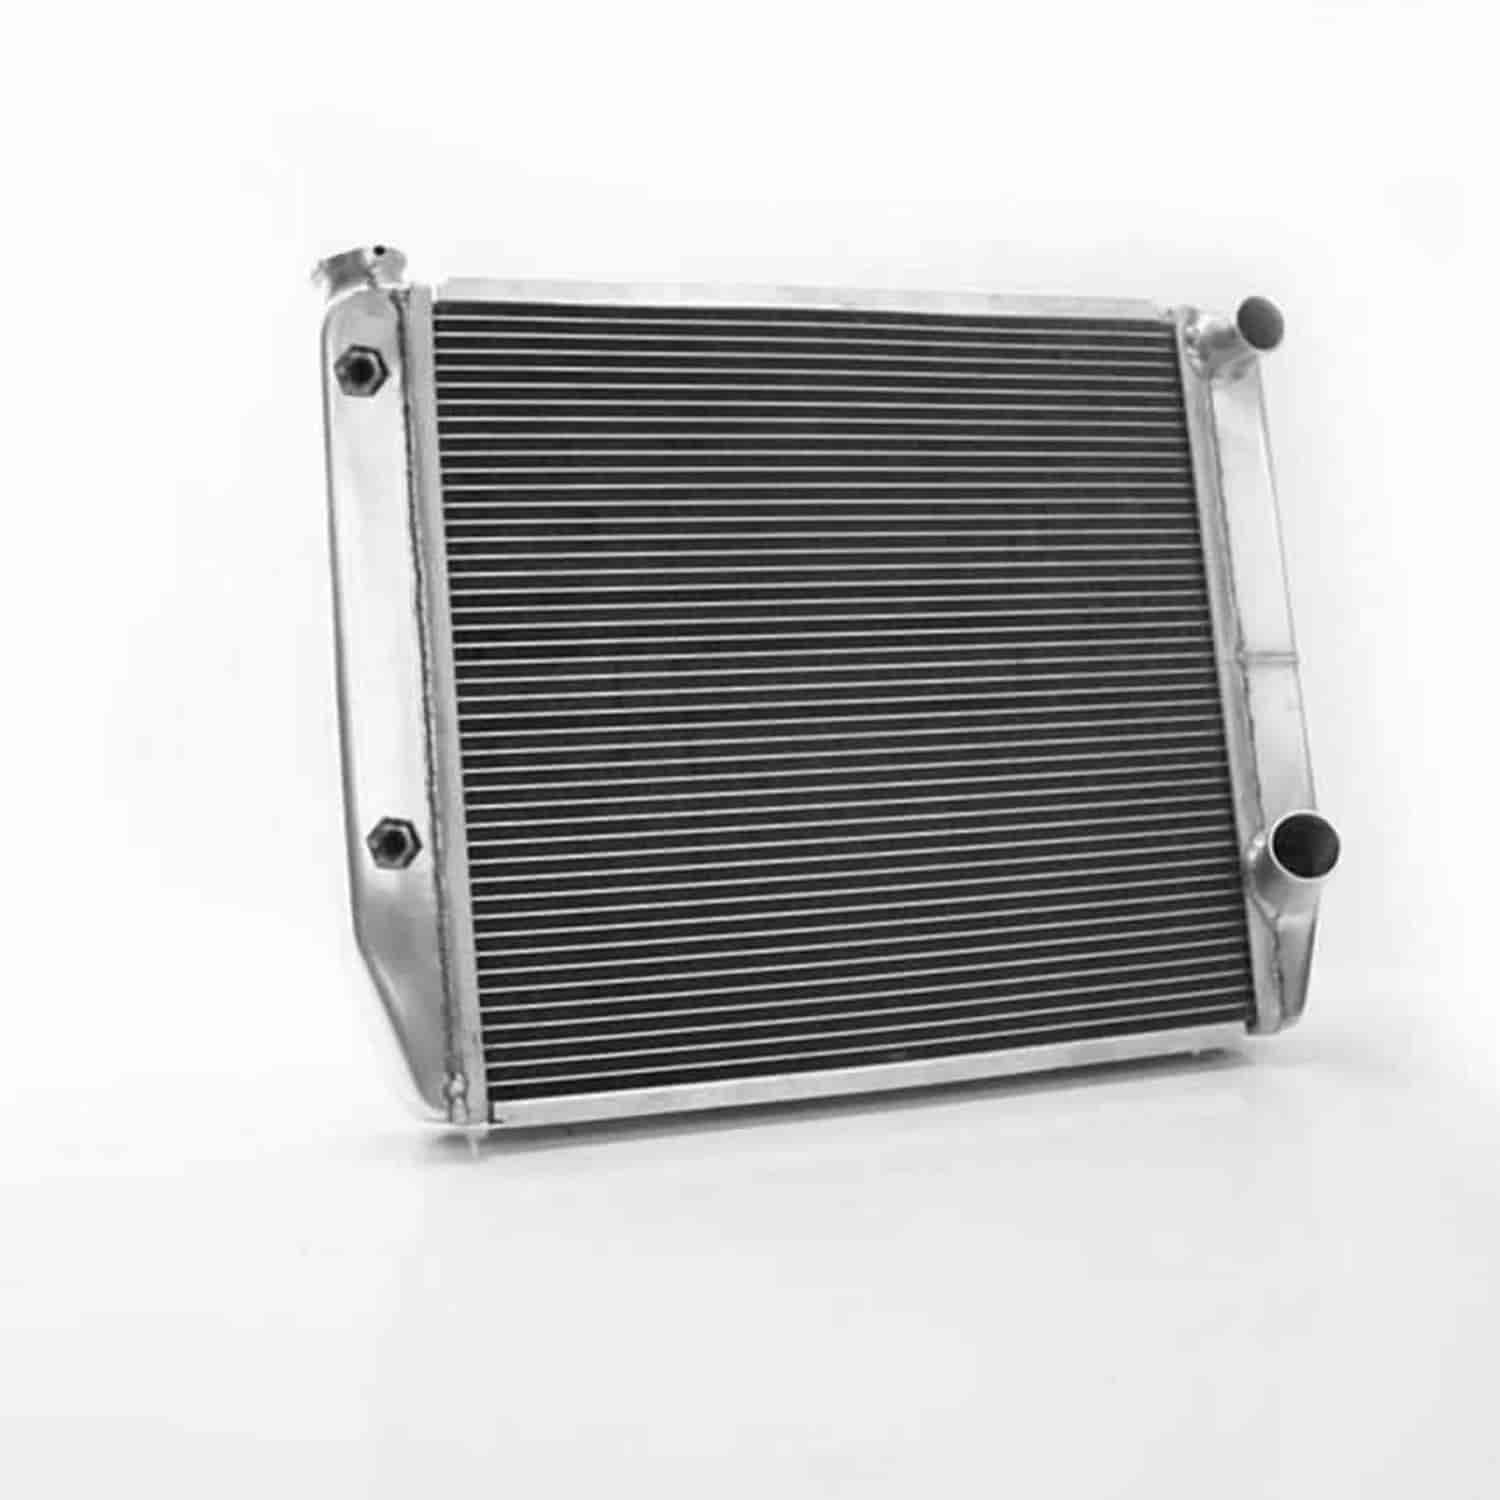 ClassicCool Universal Fit Radiator Dual Pass Crossflow Design 24" x 19" with Transmission Cooler